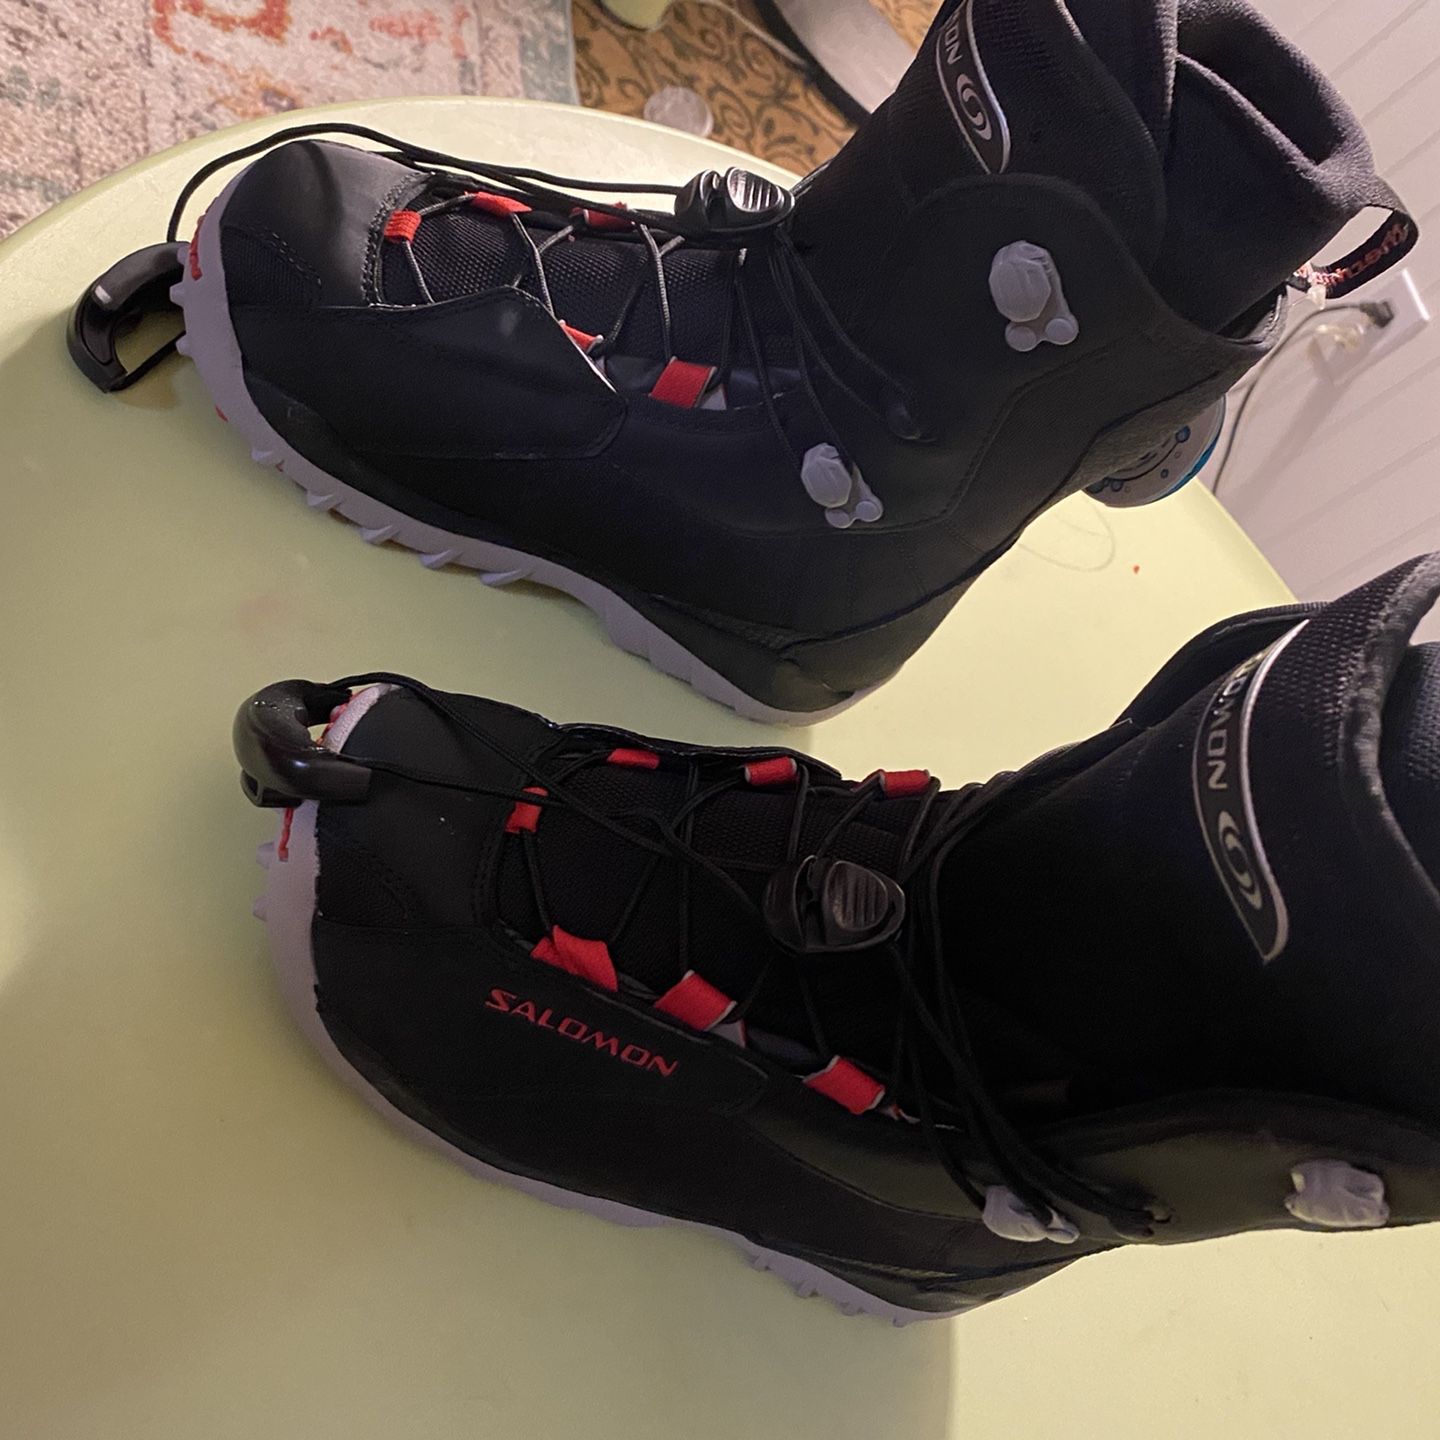 new snowboard boots SALOMON KAMOOKS, thermic fit, black/red 25.5 blended size 7 eu 40.3 for Sale in San Ramon, CA -